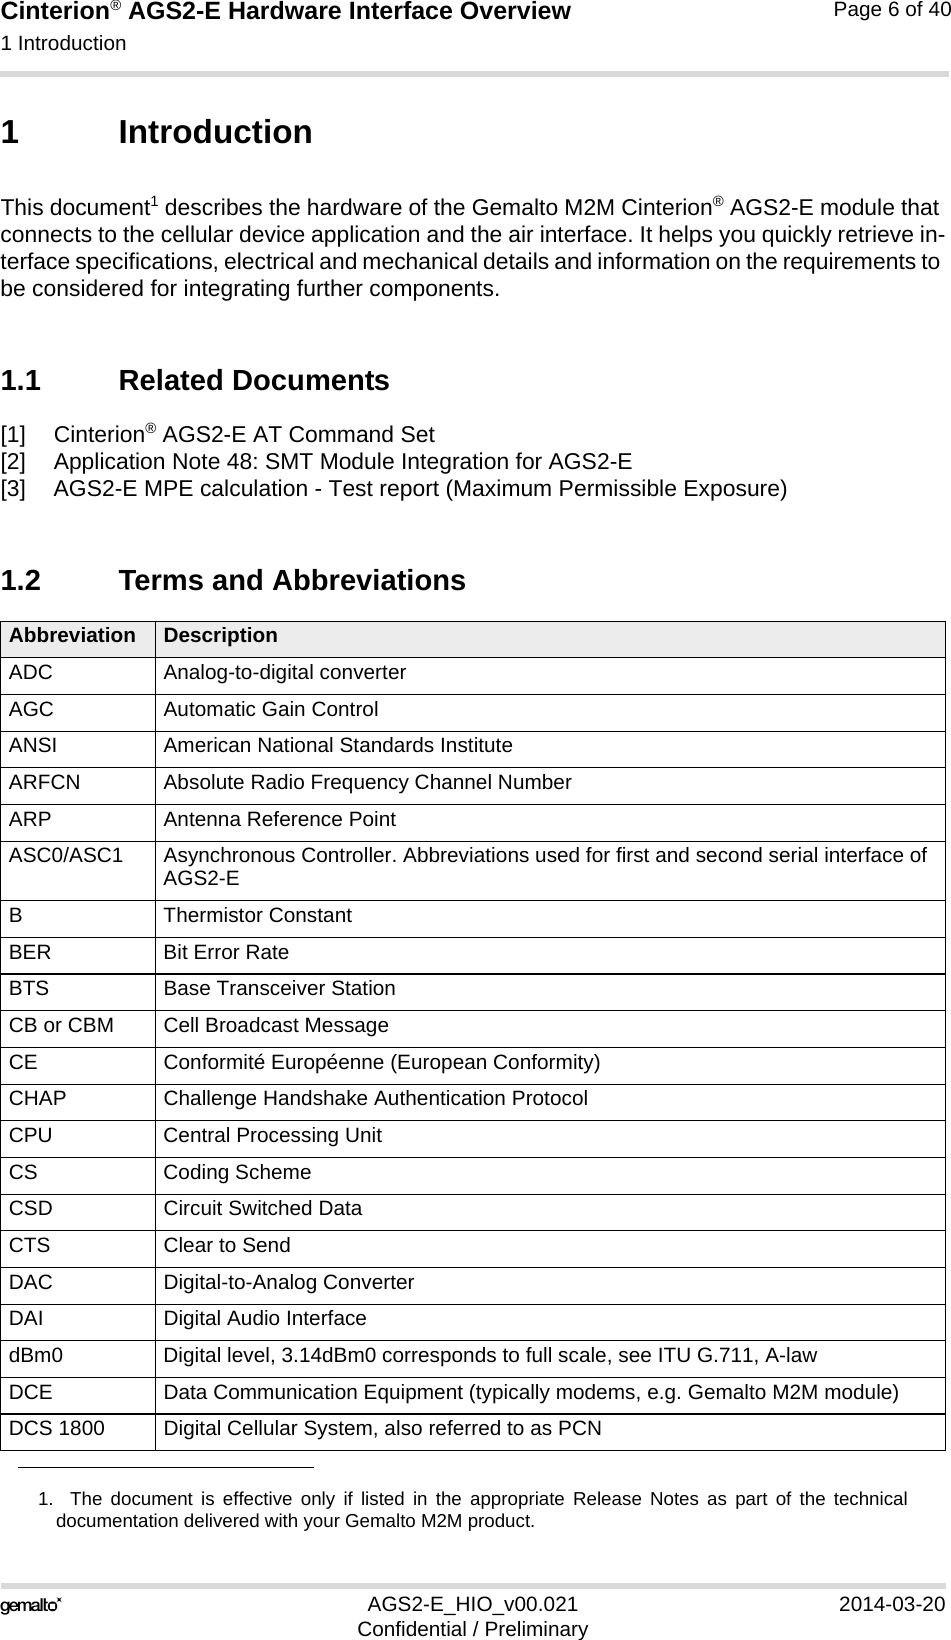 Cinterion® AGS2-E Hardware Interface Overview1 Introduction14AGS2-E_HIO_v00.021 2014-03-20Confidential / PreliminaryPage 6 of 401 IntroductionThis document1 describes the hardware of the Gemalto M2M Cinterion® AGS2-E module that connects to the cellular device application and the air interface. It helps you quickly retrieve in-terface specifications, electrical and mechanical details and information on the requirements to be considered for integrating further components.1.1 Related Documents[1] Cinterion® AGS2-E AT Command Set[2] Application Note 48: SMT Module Integration for AGS2-E[3] AGS2-E MPE calculation - Test report (Maximum Permissible Exposure)1.2 Terms and Abbreviations1.  The document is effective only if listed in the appropriate Release Notes as part of the technicaldocumentation delivered with your Gemalto M2M product.Abbreviation DescriptionADC Analog-to-digital converterAGC Automatic Gain ControlANSI American National Standards InstituteARFCN Absolute Radio Frequency Channel NumberARP Antenna Reference PointASC0/ASC1 Asynchronous Controller. Abbreviations used for first and second serial interface of AGS2-EB Thermistor ConstantBER Bit Error RateBTS Base Transceiver StationCB or CBM Cell Broadcast MessageCE Conformité Européenne (European Conformity)CHAP Challenge Handshake Authentication ProtocolCPU Central Processing UnitCS Coding SchemeCSD Circuit Switched DataCTS Clear to SendDAC Digital-to-Analog ConverterDAI Digital Audio InterfacedBm0 Digital level, 3.14dBm0 corresponds to full scale, see ITU G.711, A-lawDCE Data Communication Equipment (typically modems, e.g. Gemalto M2M module)DCS 1800 Digital Cellular System, also referred to as PCN